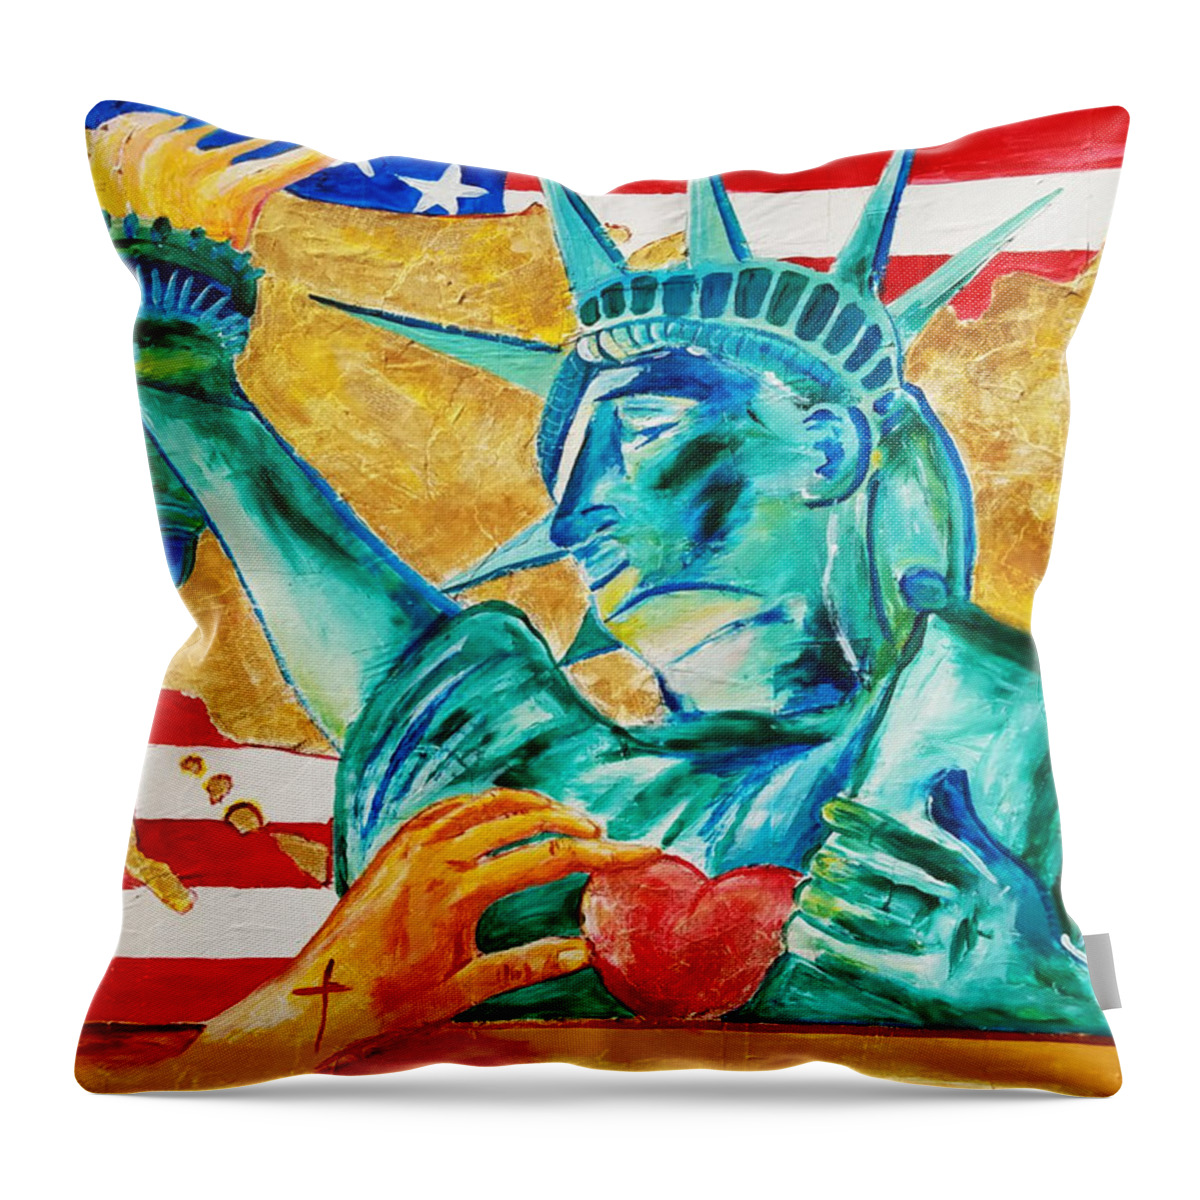 Jennifer Page Throw Pillow featuring the painting Americas Restoration by Jennifer Page